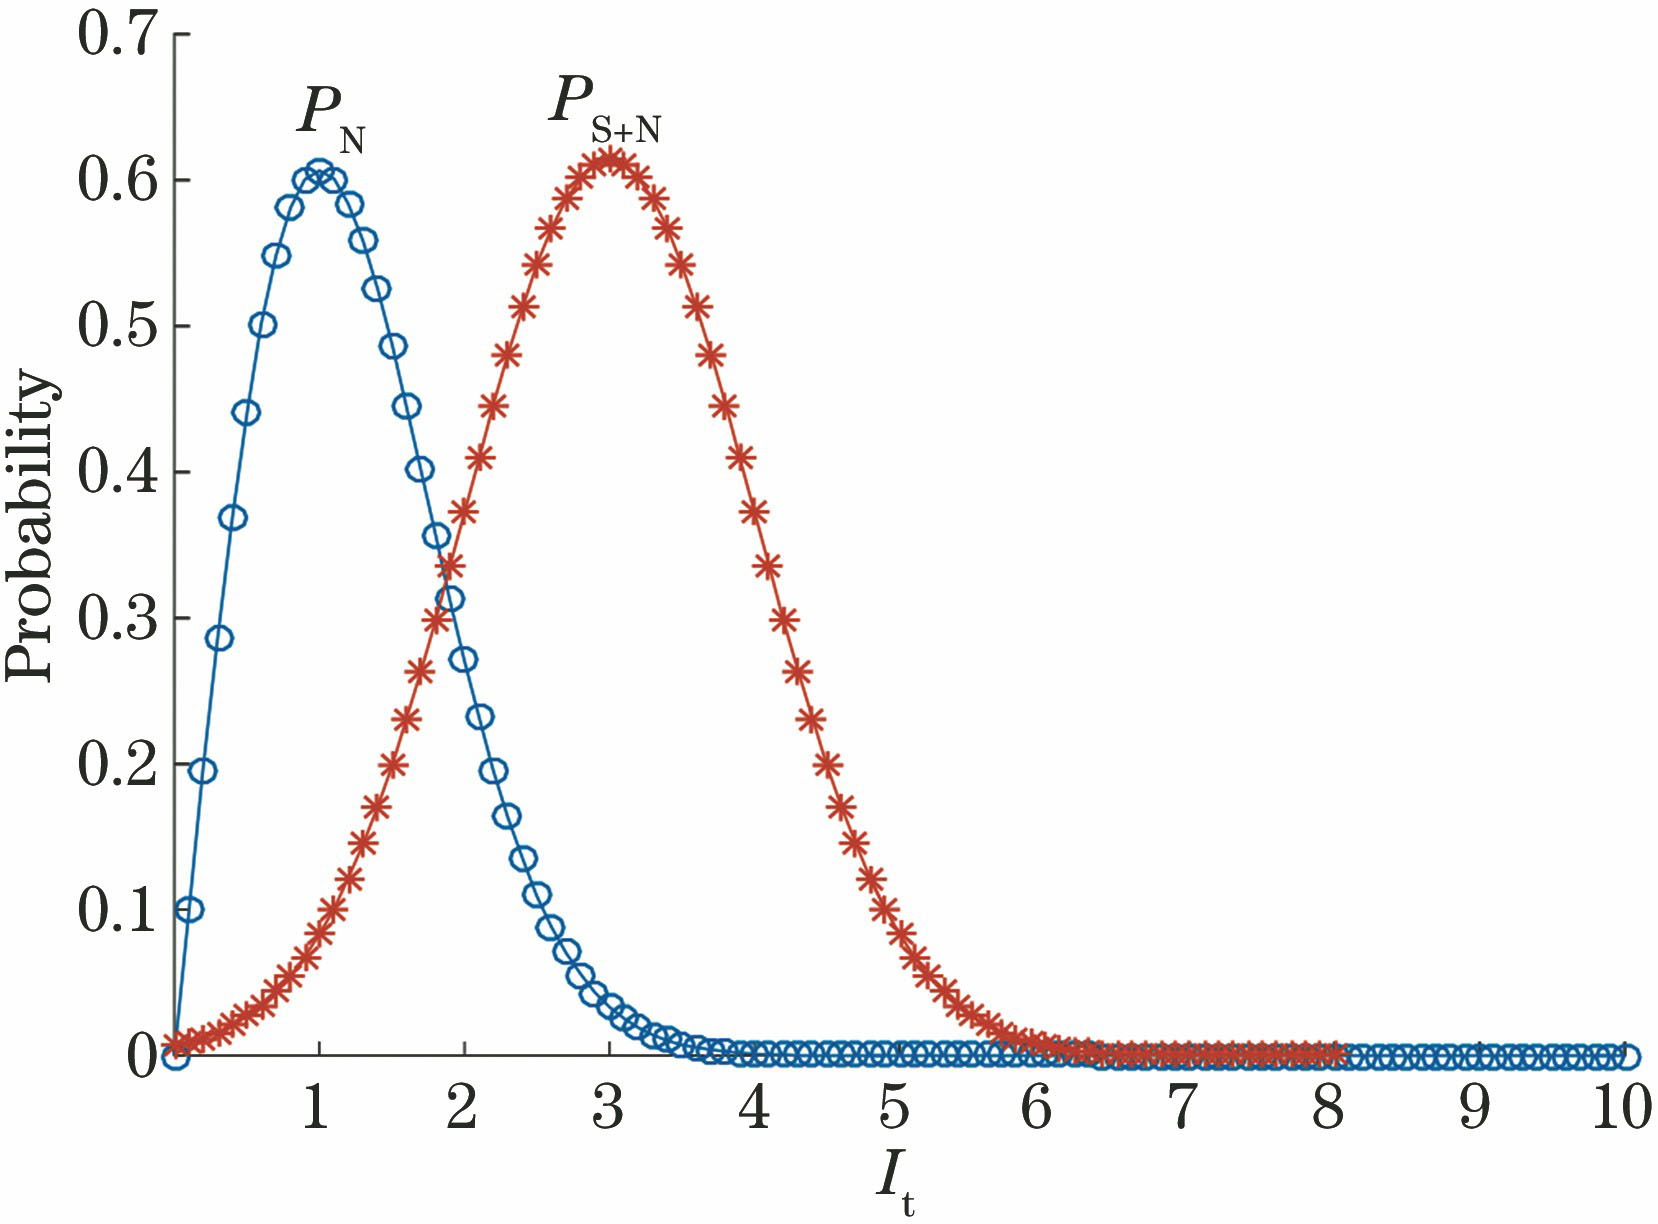 Distributions of noise probability and signal plus noise probability